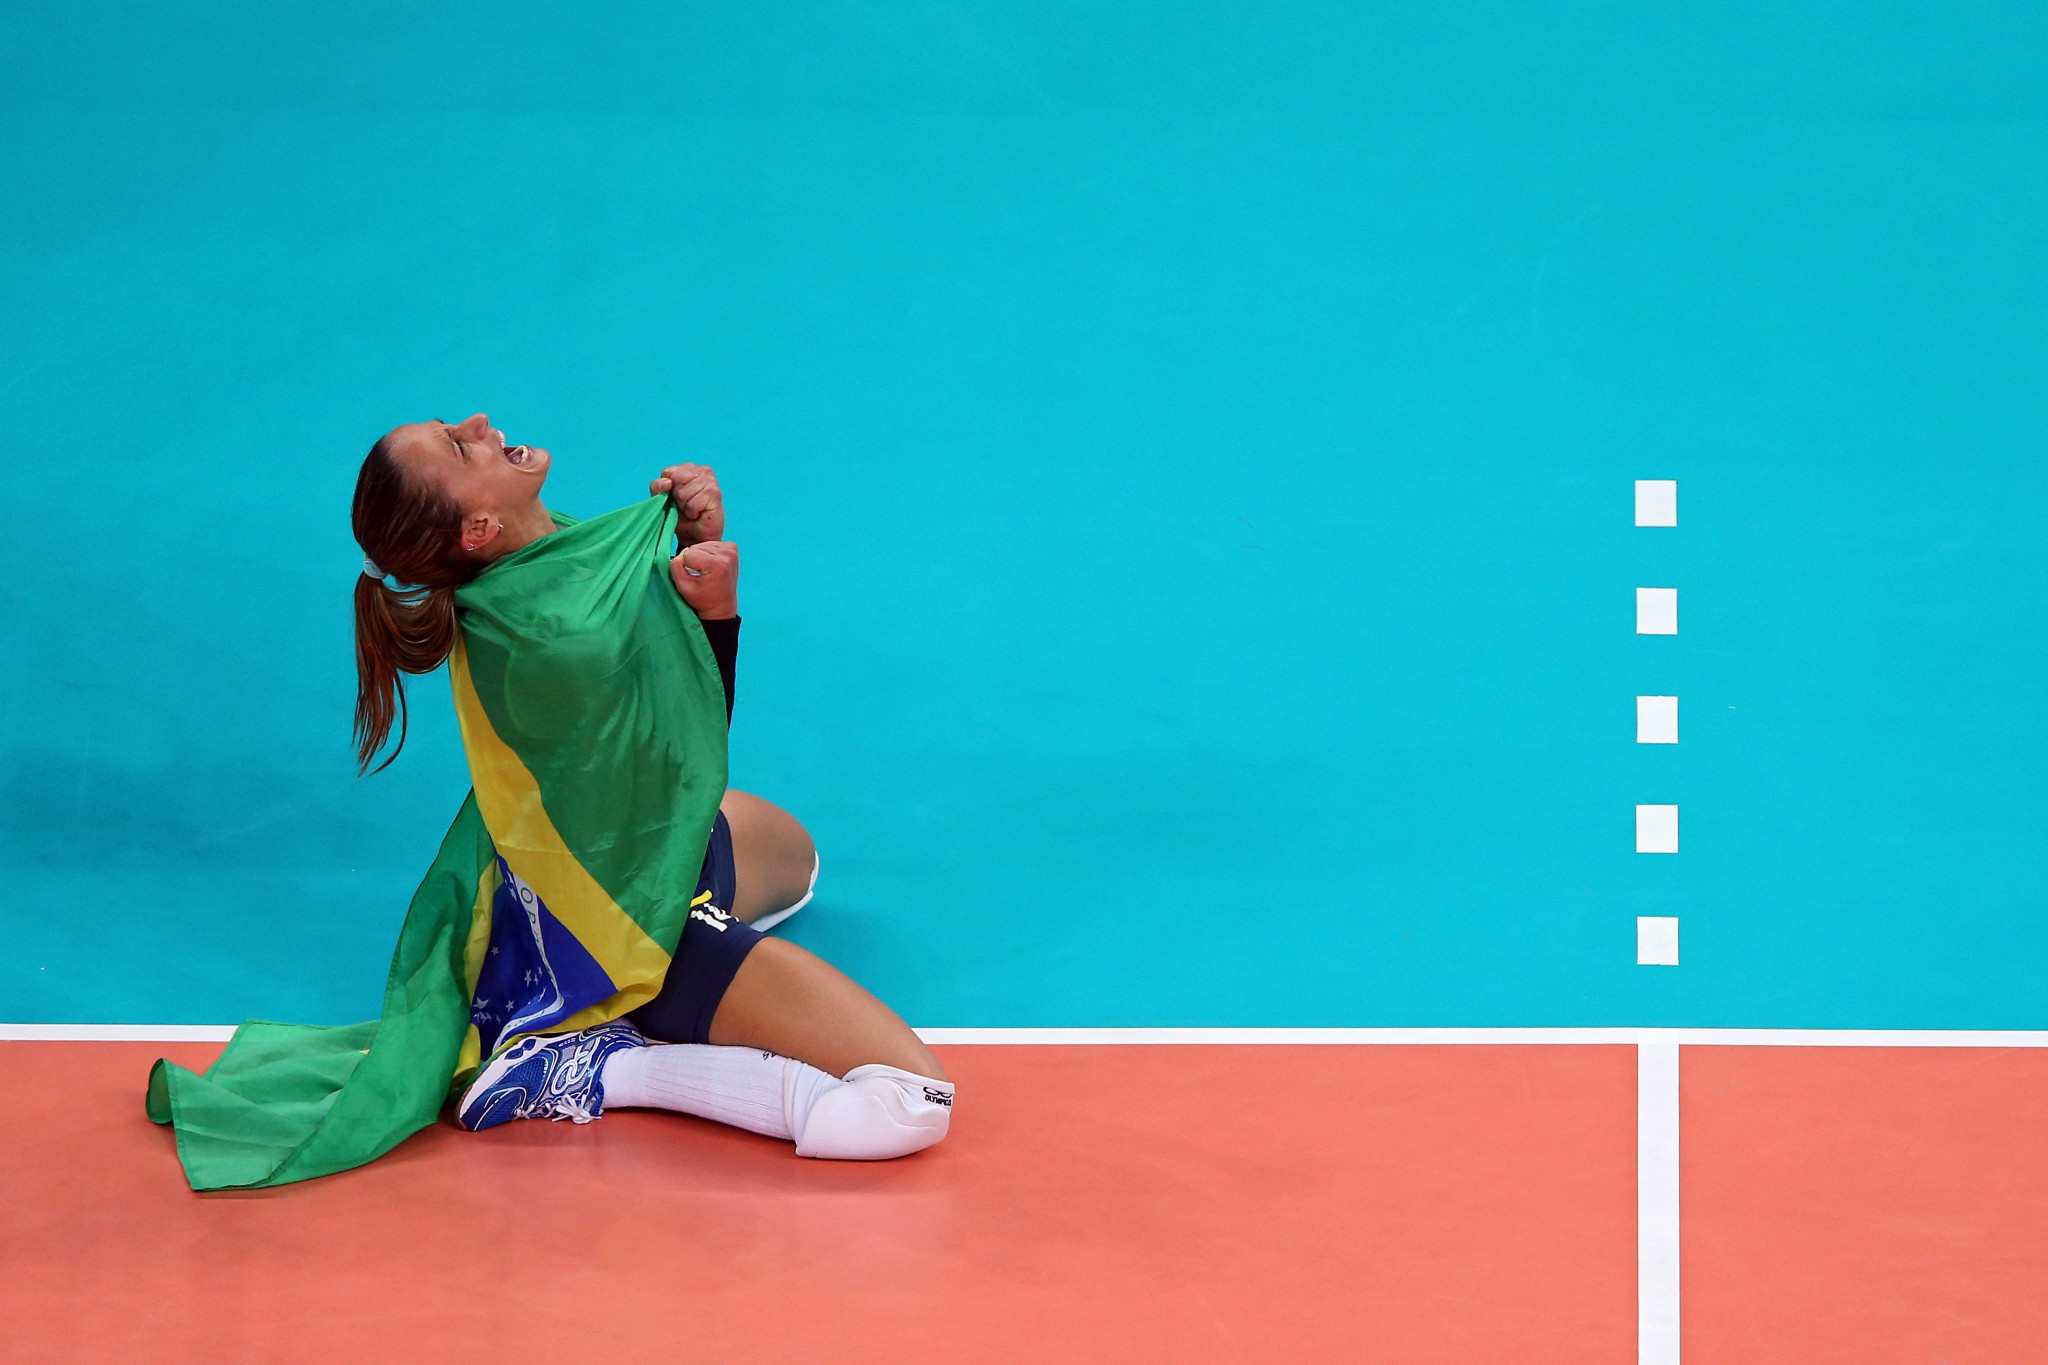 Brazil beat Peru 3-2 in the Cali 2021 women's volleyball gold medal match ©Getty Images